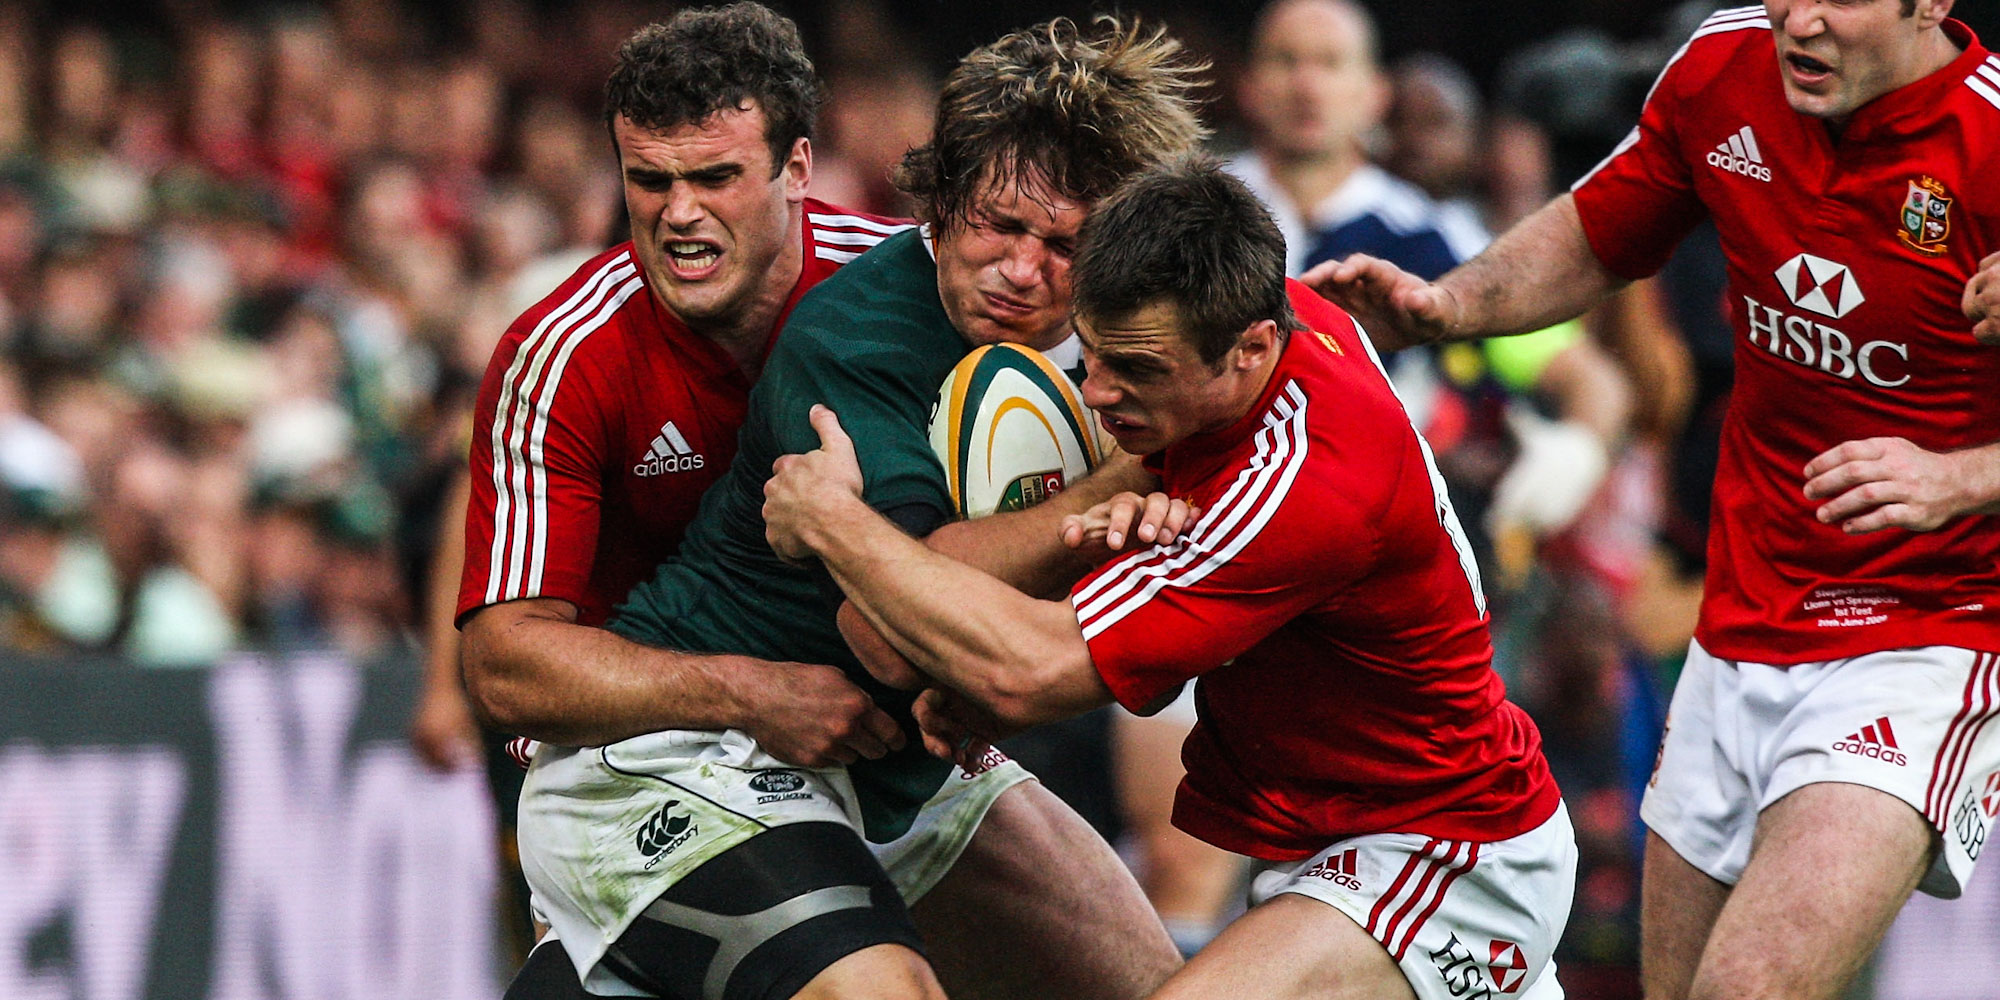 Taking on the British & Irish Lions in 2009's brutal series.